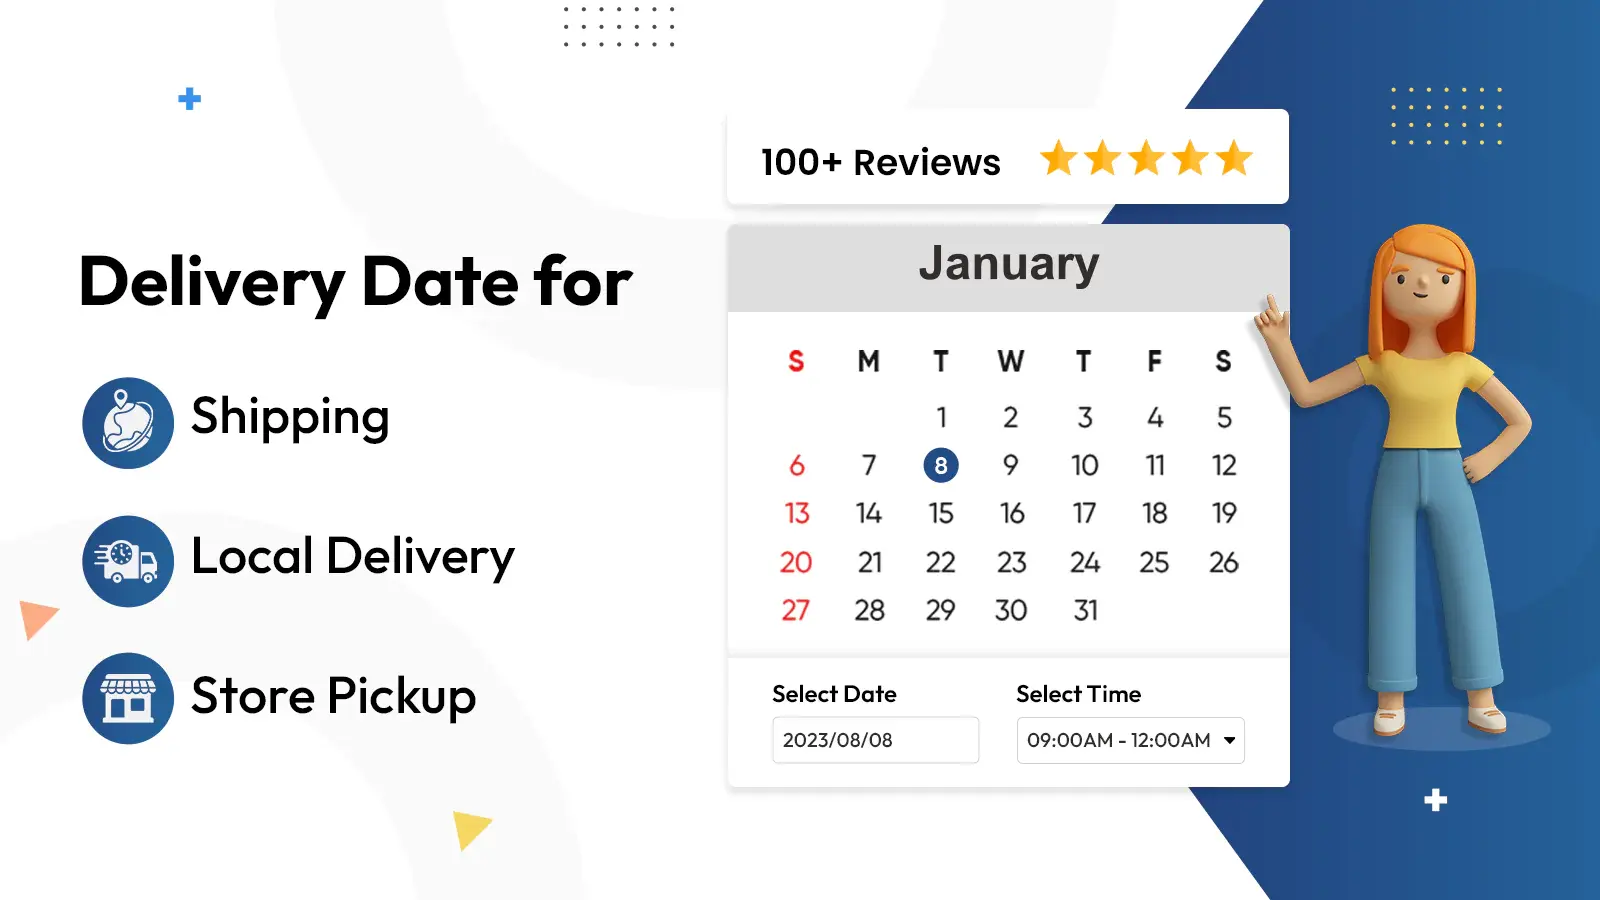 Shopify Delivery Date Picker for Shipping Local DElivery and Store Pickup